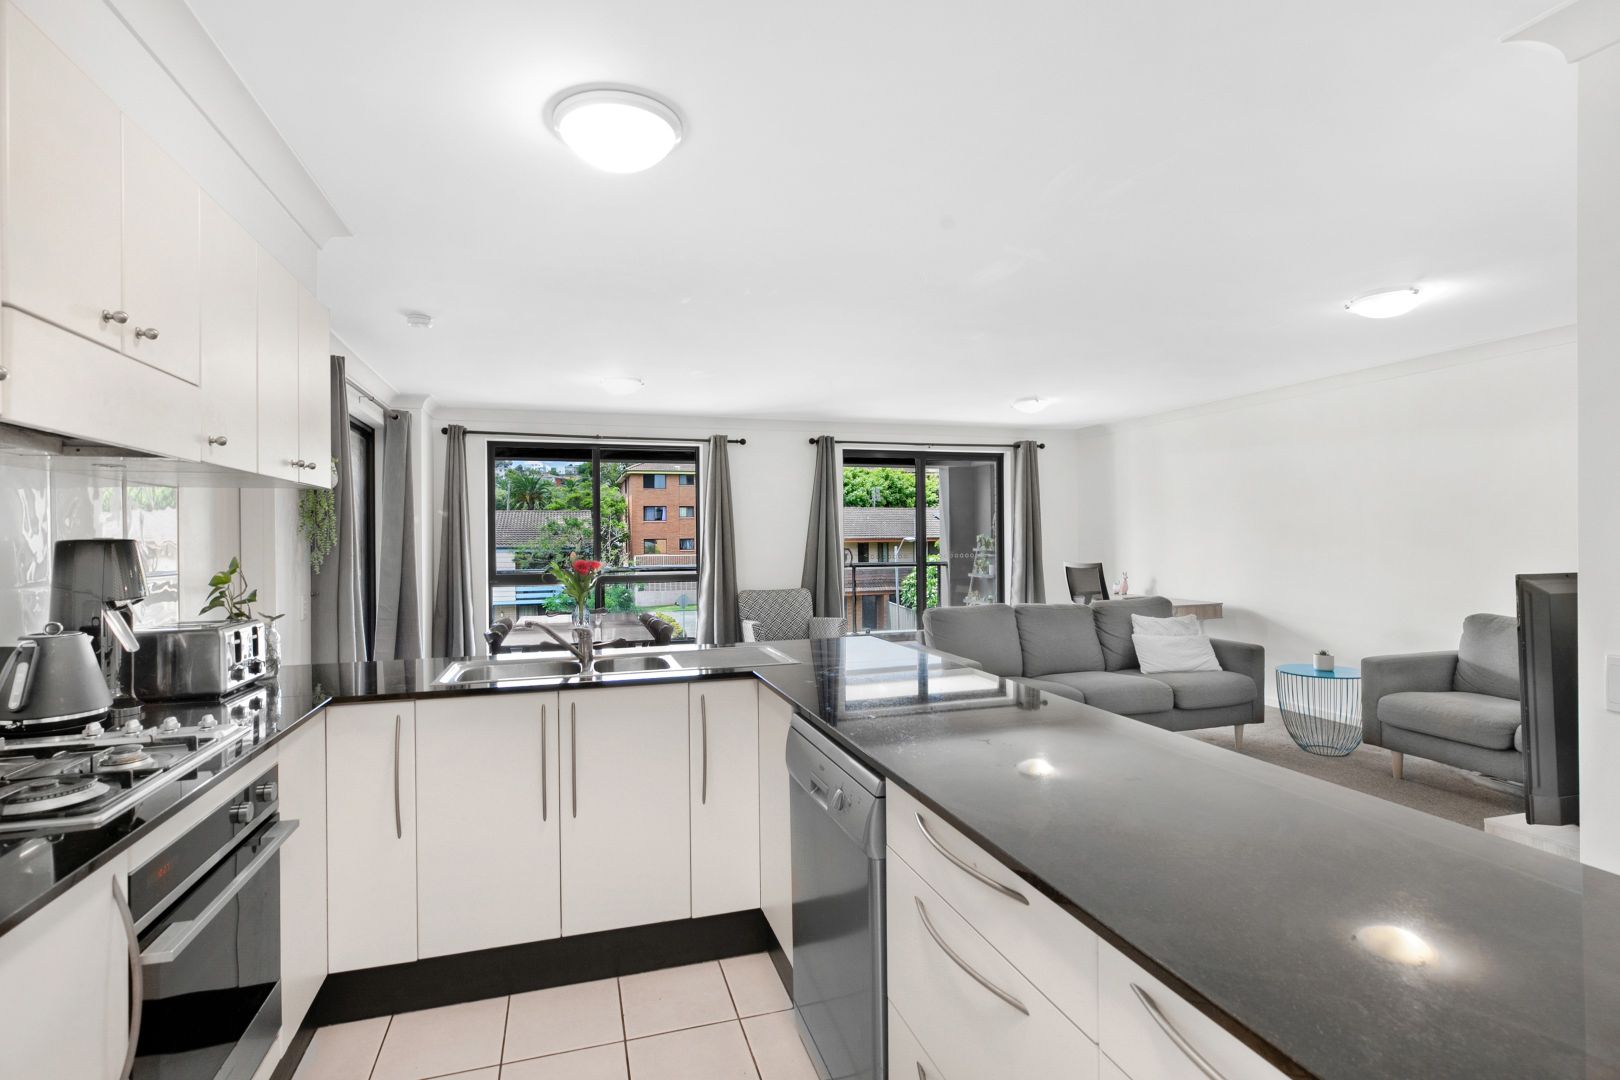 210/185 Darby Street, Cooks Hill NSW 2300